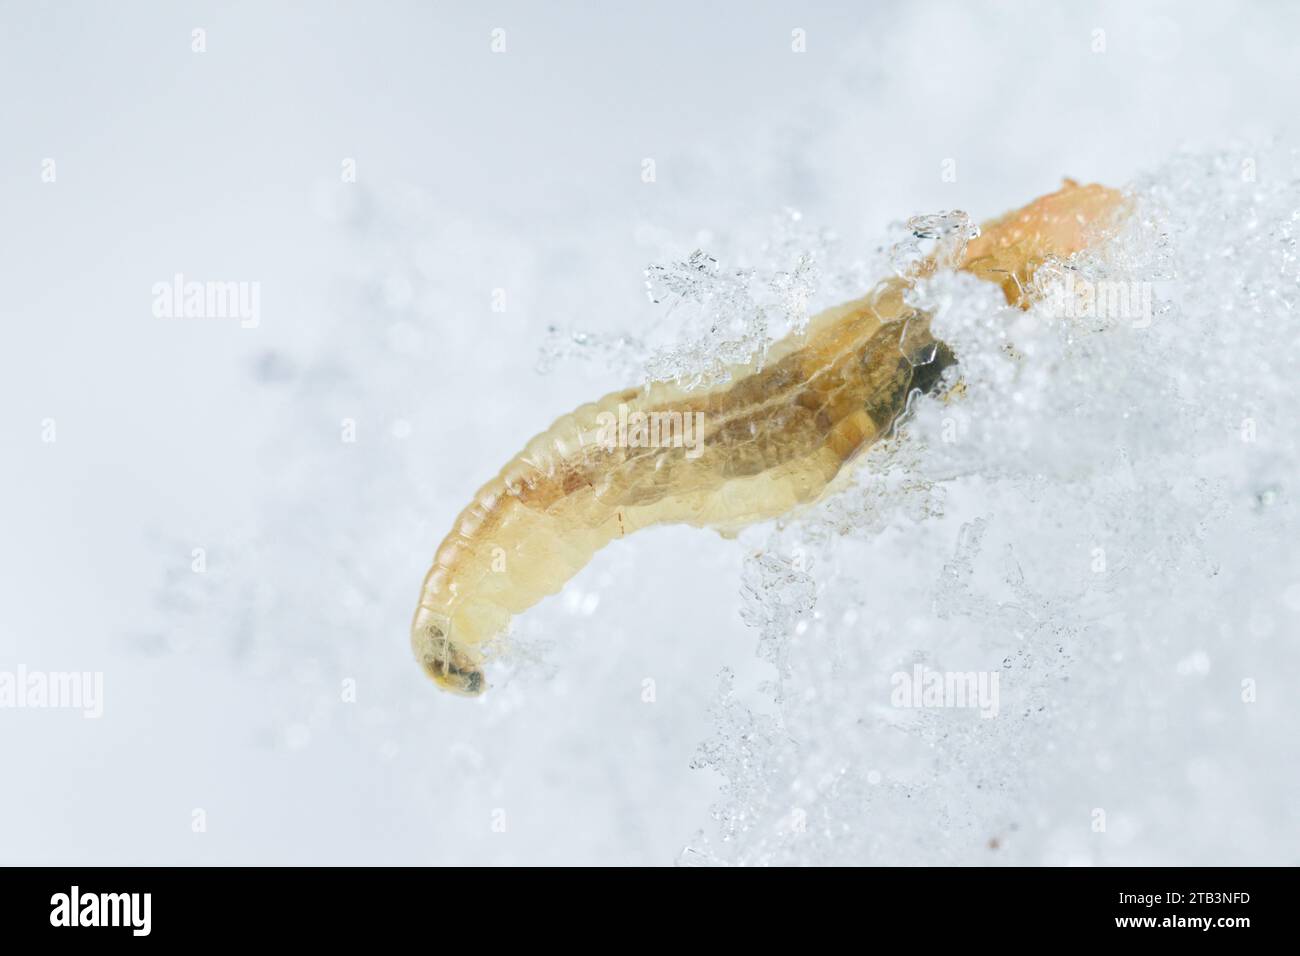 Hover-fly larvae (Syrphidae) on snow Stock Photo